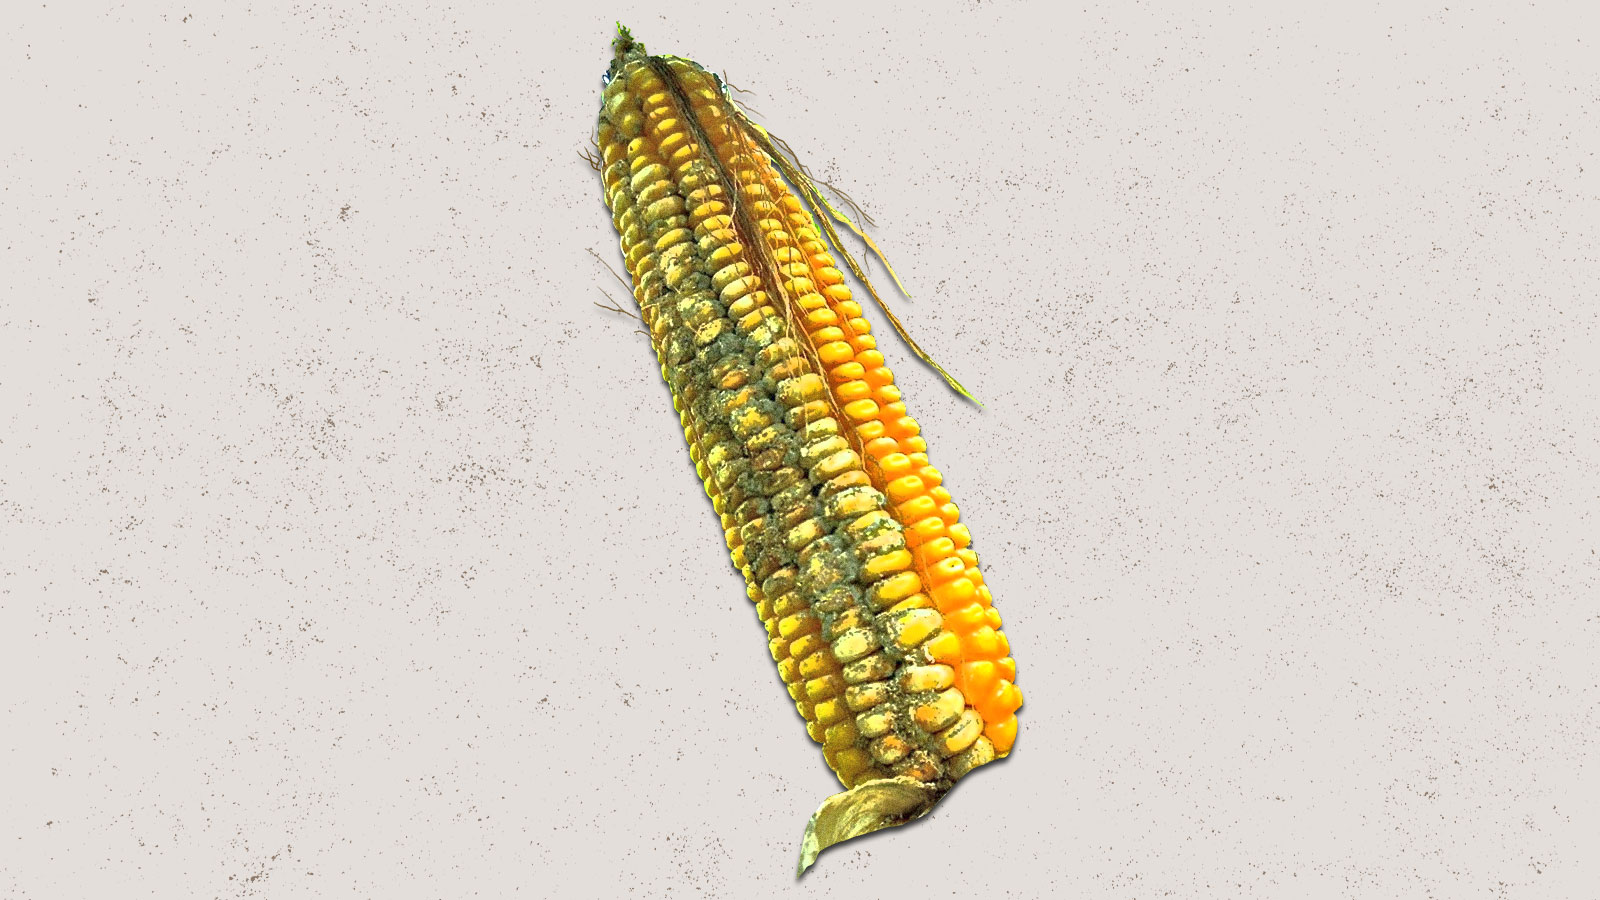 cutout of corn with green mold growing on it on dirty looking beige background